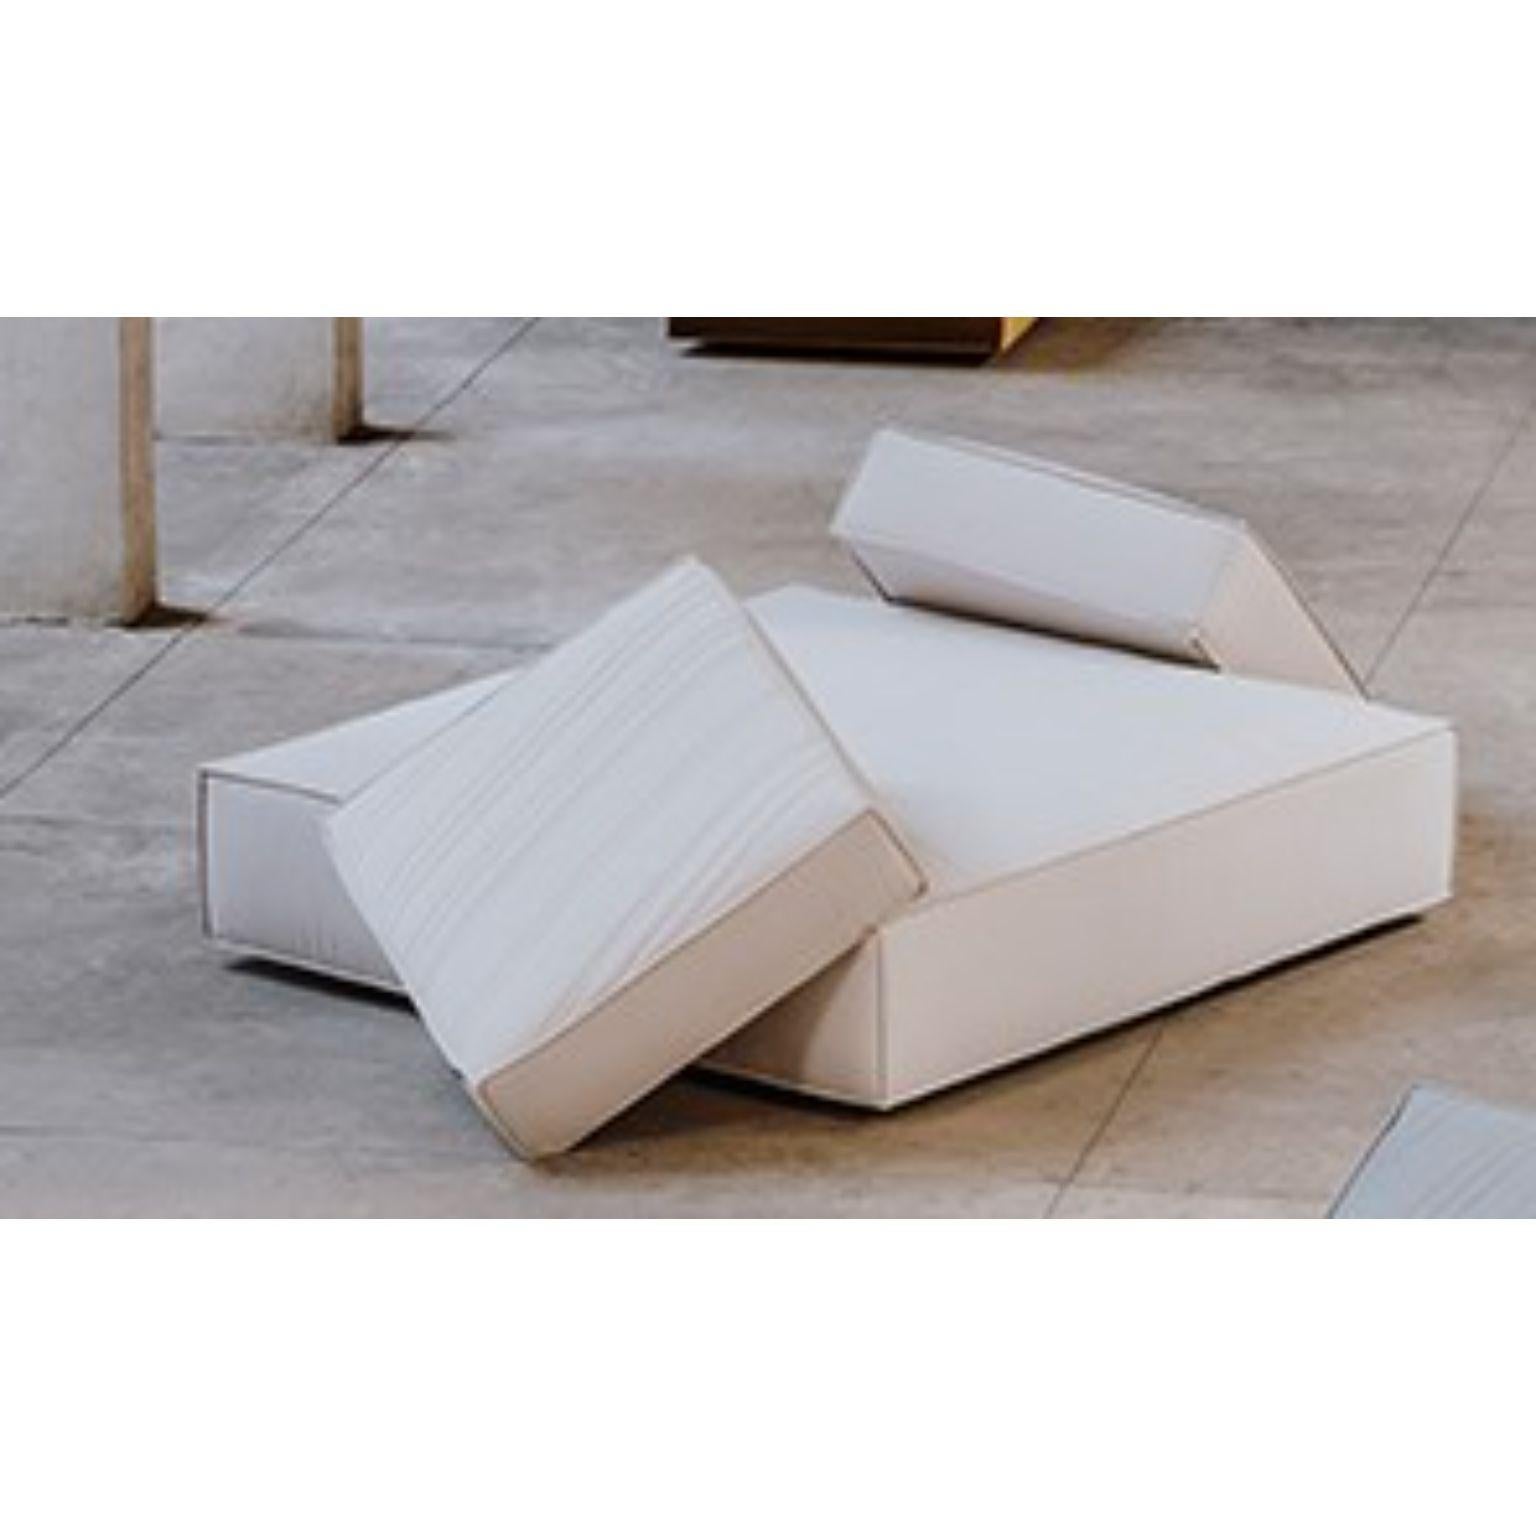 Stack pouf by Nendo
Pouf with cushion
Materials: Upholstery: Fabric 
 Structure: Black lacquered MDF
Dimensions: W314 x D180 xH90 cm
 HS 42 cm

Also available in leather.
  

Stack is a cushion casually tossed on top of another cushion.